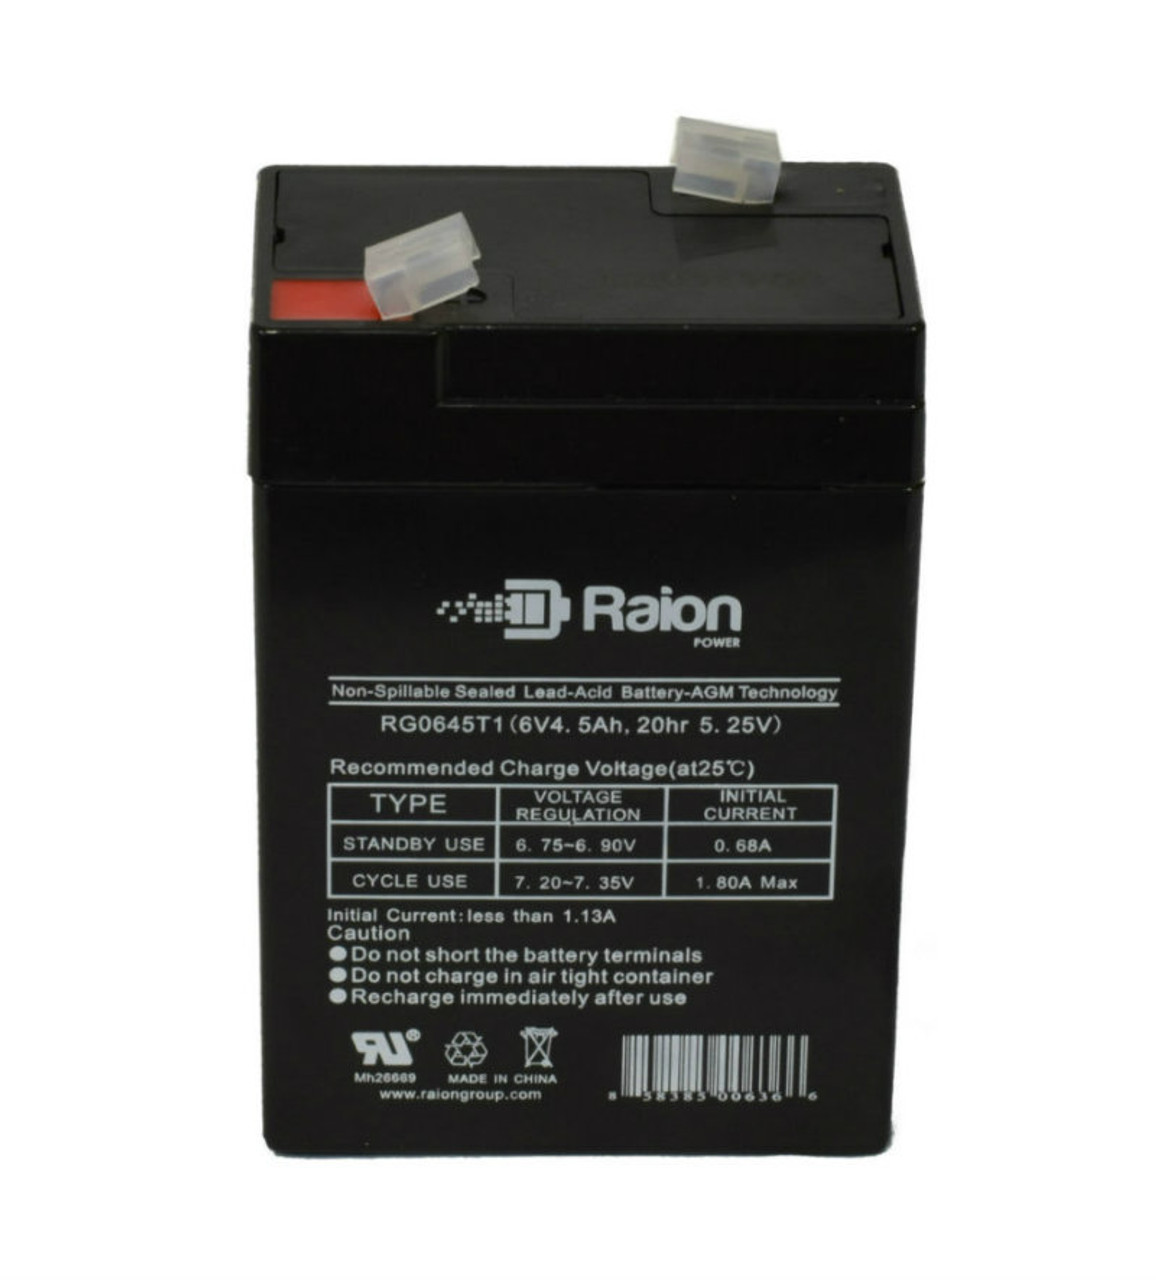 Raion Power RG0645T1 Replacement Battery Cartridge for SBB 3-FM-3.5